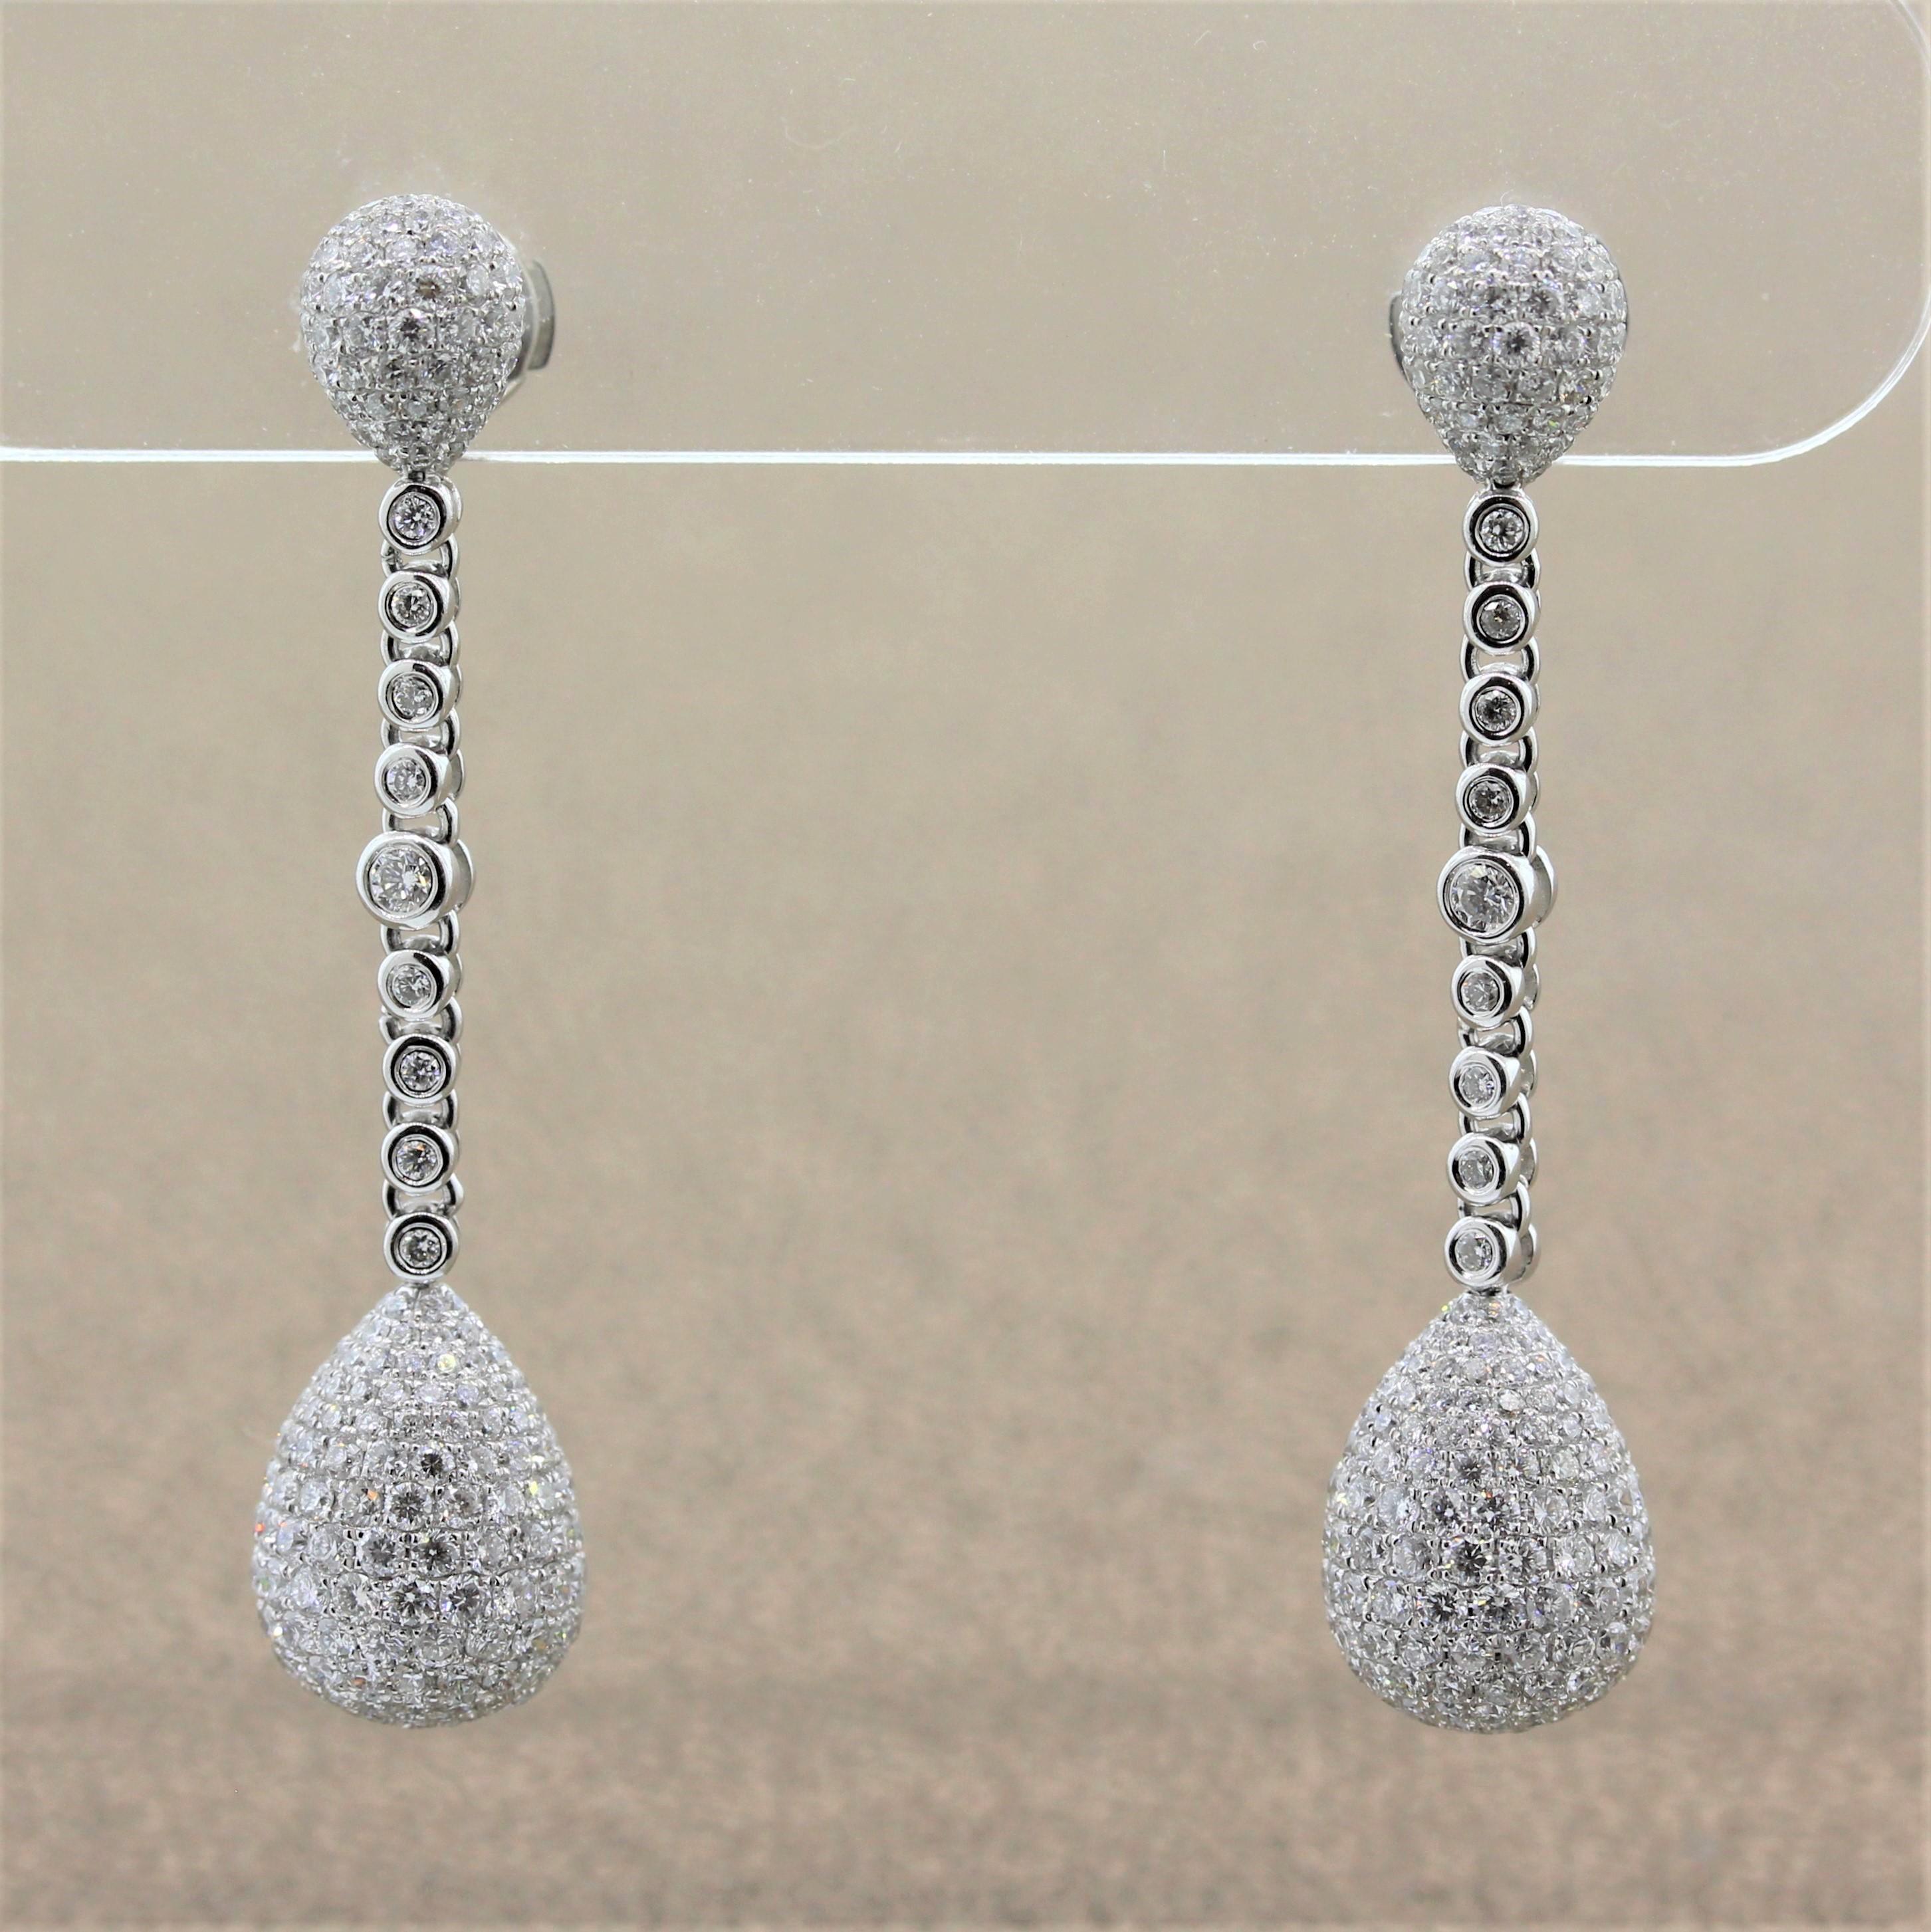 An elegant pair of drop earrings featuring 4.40 carats of round brilliant cut diamonds pave set in an 18K white gold setting. The two pear shaped drops are attached by a string of diamonds adding sparkle from top to bottom.

Earring Length: 1.65